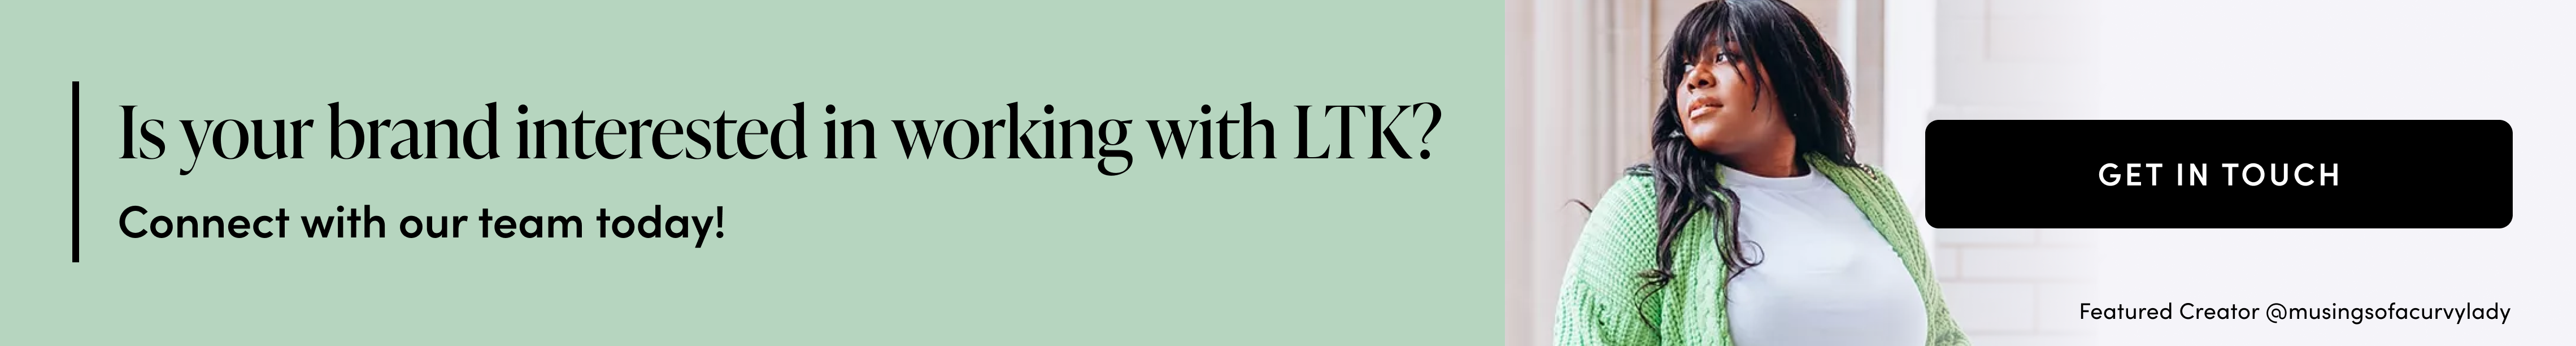 Is your brand interested in working with LTK?  - Connect with our team today! - get in touch